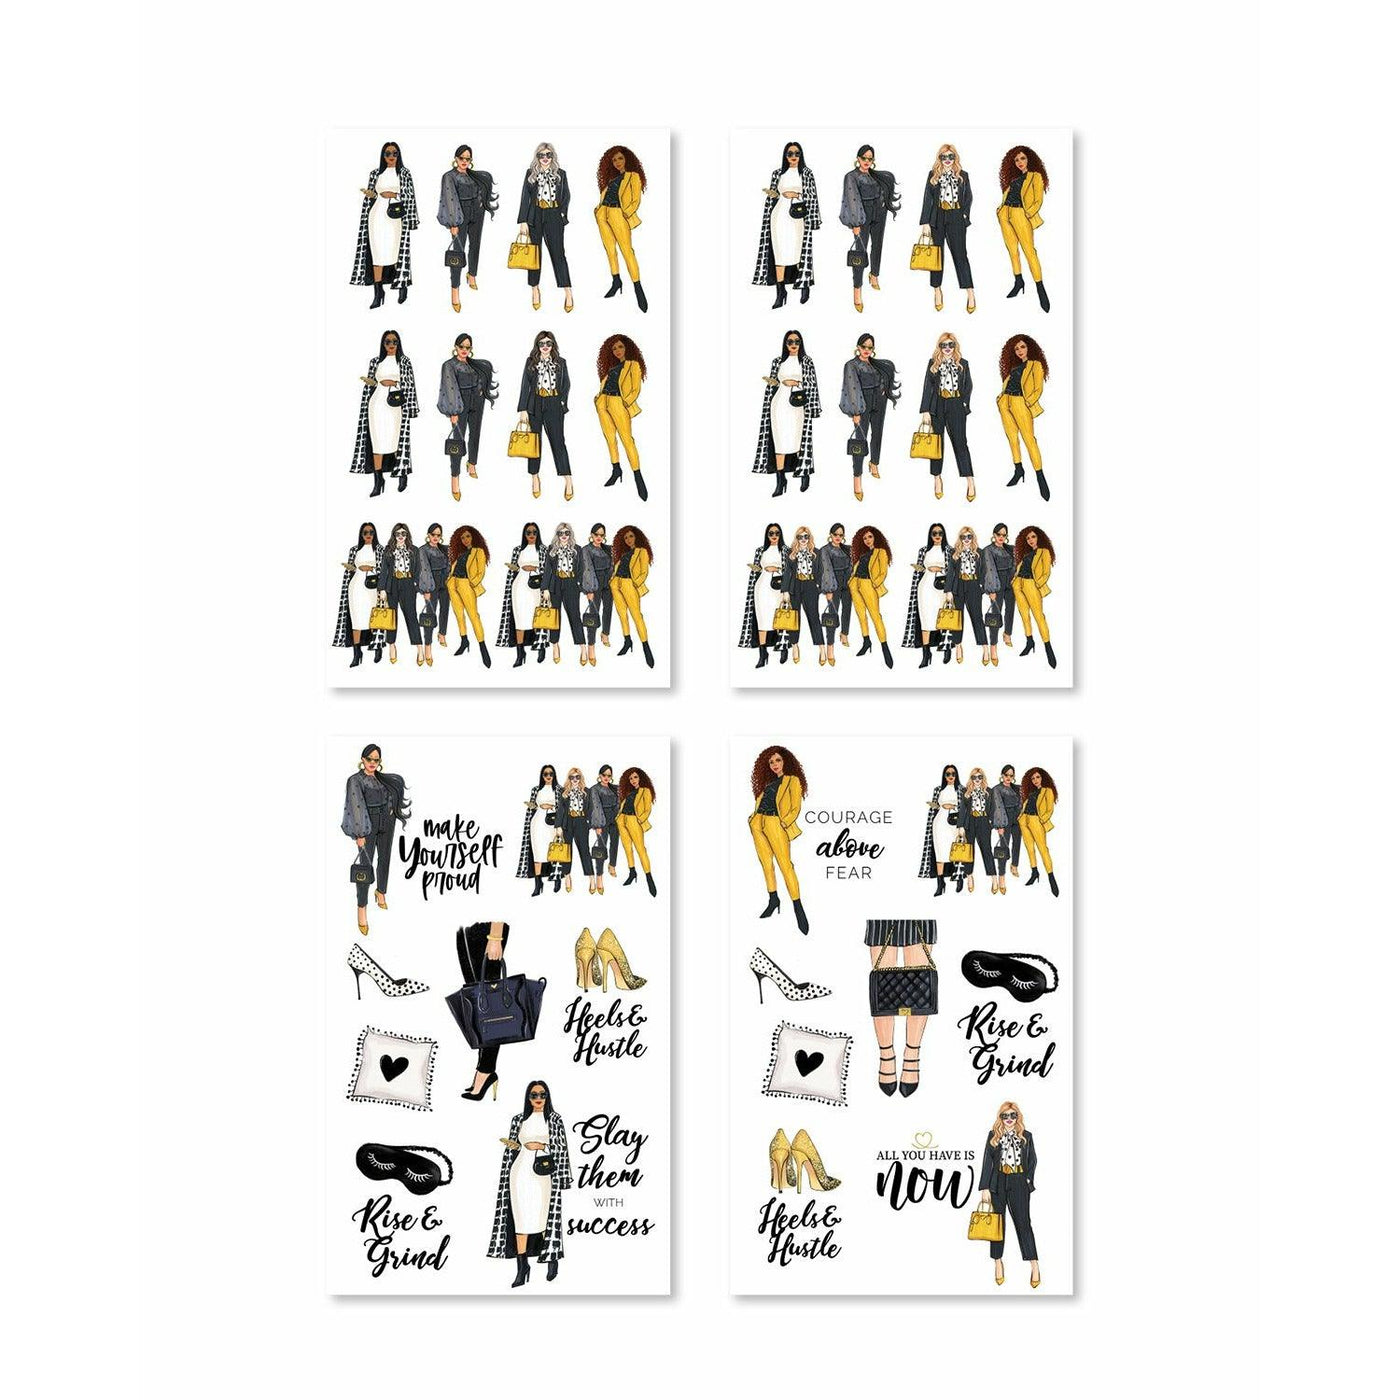 HEELS AND HUSTLE FUNCTIONAL STICKER BOOK Page 6 by Rongrong DeVoe